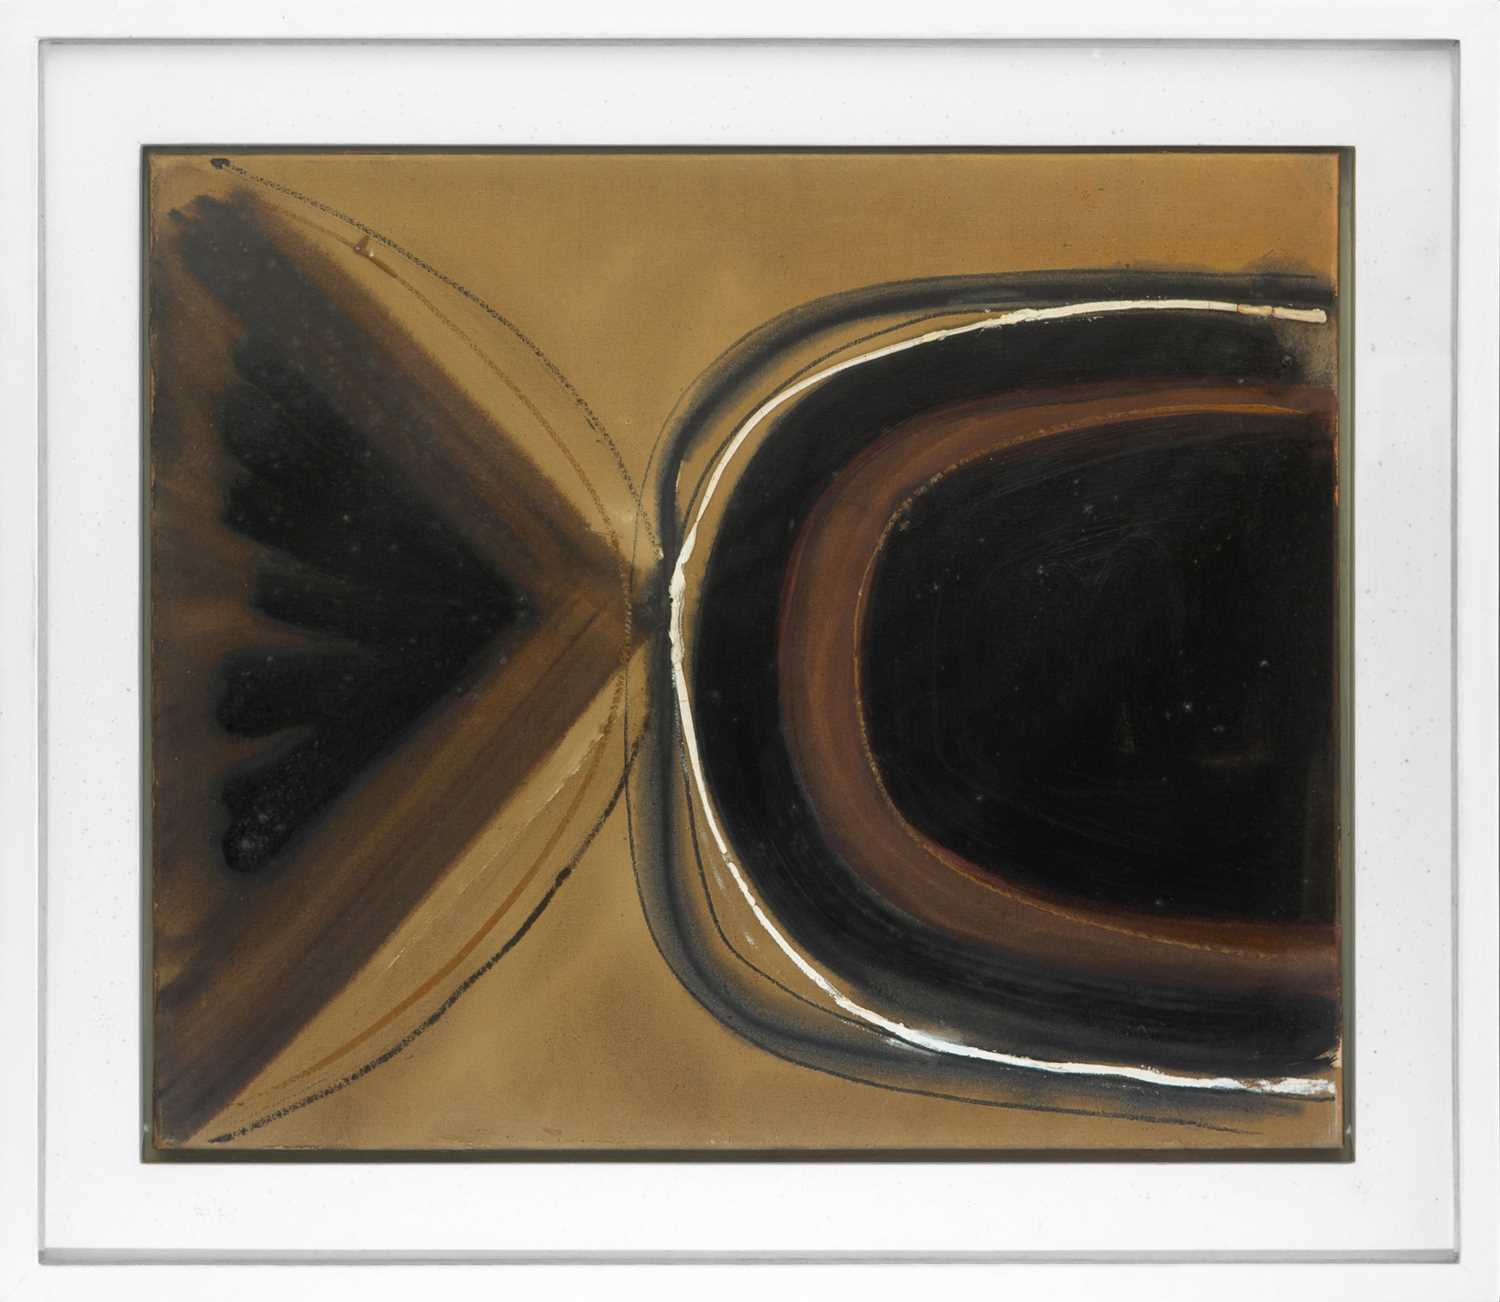 Terry FROST (1915- 2003) Umber and Ochre, 1961 - Image 2 of 3